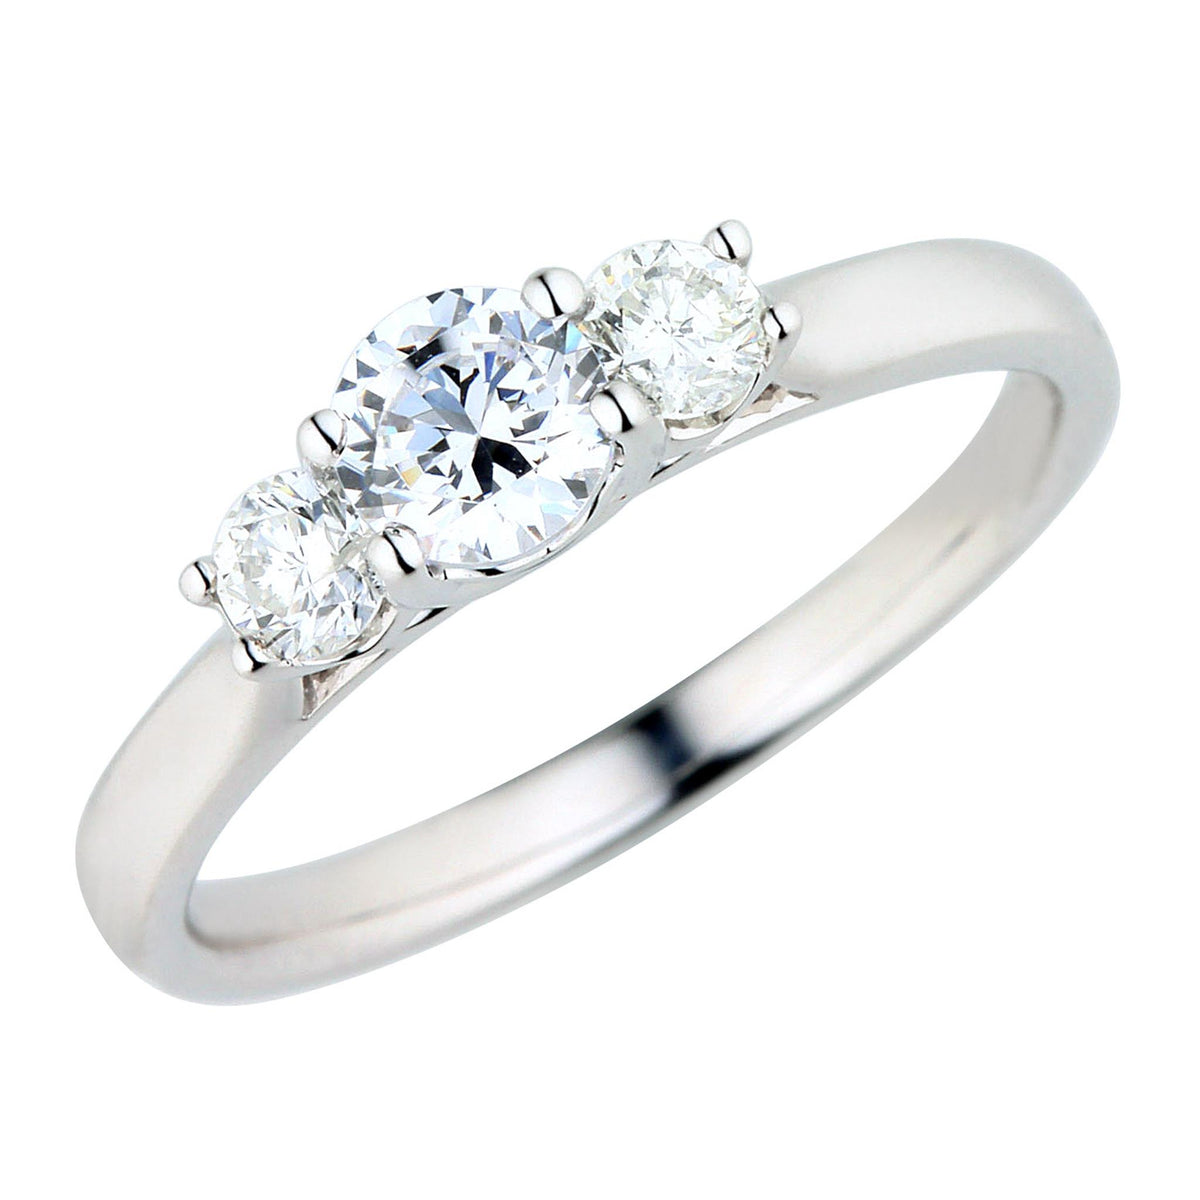 Past, Present, and Future 14Kt White Gold Three-Stone Ring With 1.04cttw Natural Diamonds